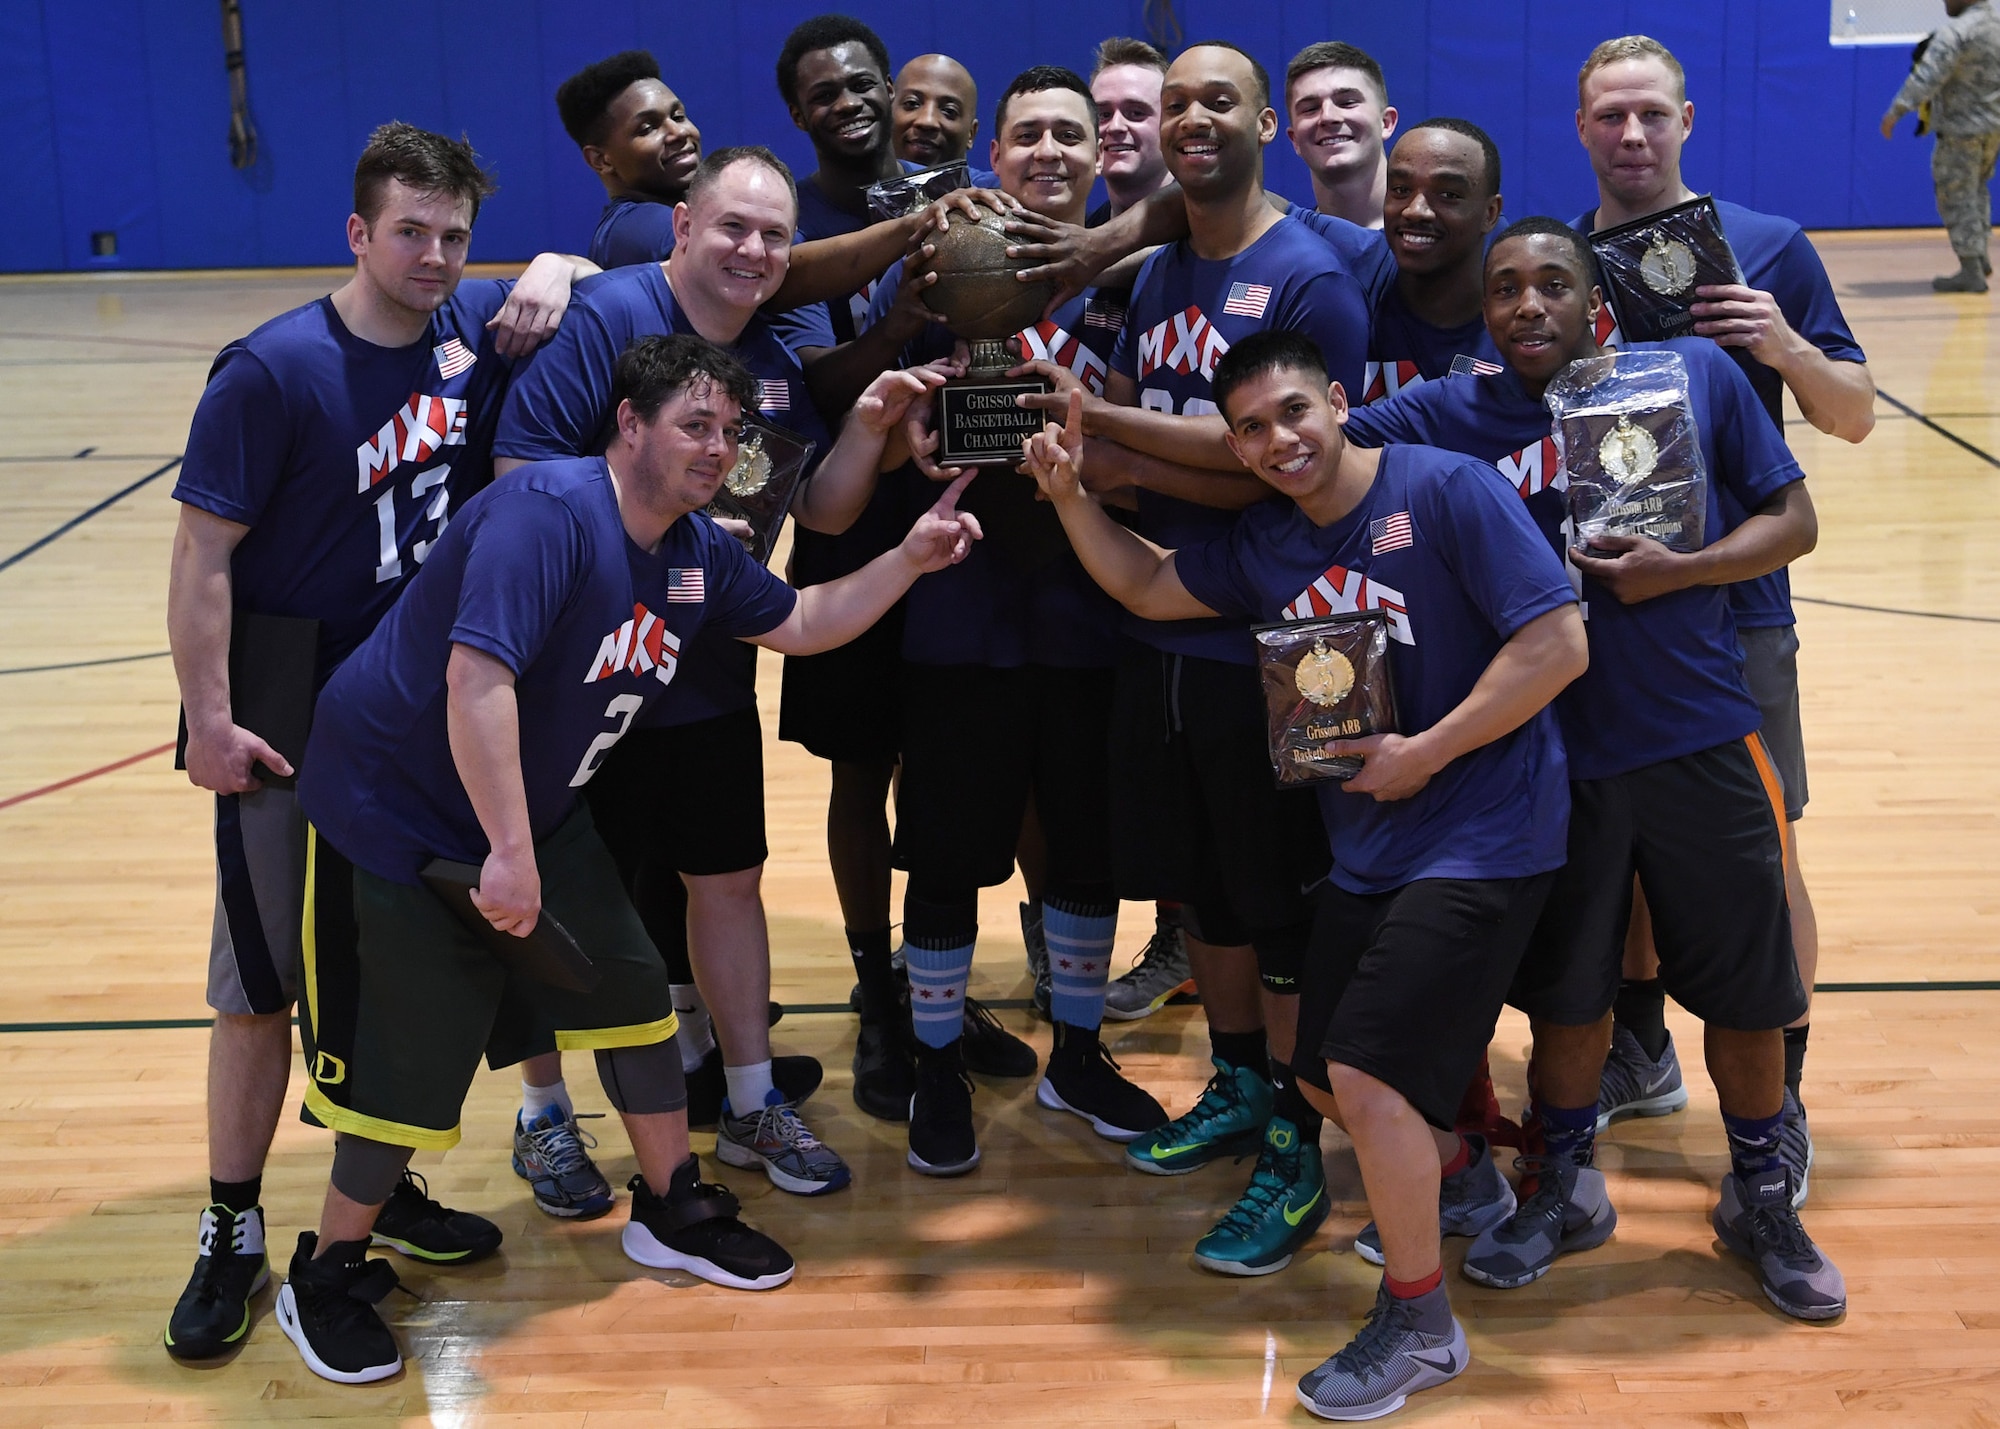 Members of the 434th Maintenance Group celebrate outgunning the 434th Security Forces Squadron during Grissom's annual basketball tournament April 7, 2018. The maintainers locked up the title by downing the defenders 36-28. (U.S. Air Force photo/Staff Sgt. Katrina HEIKKINEN)